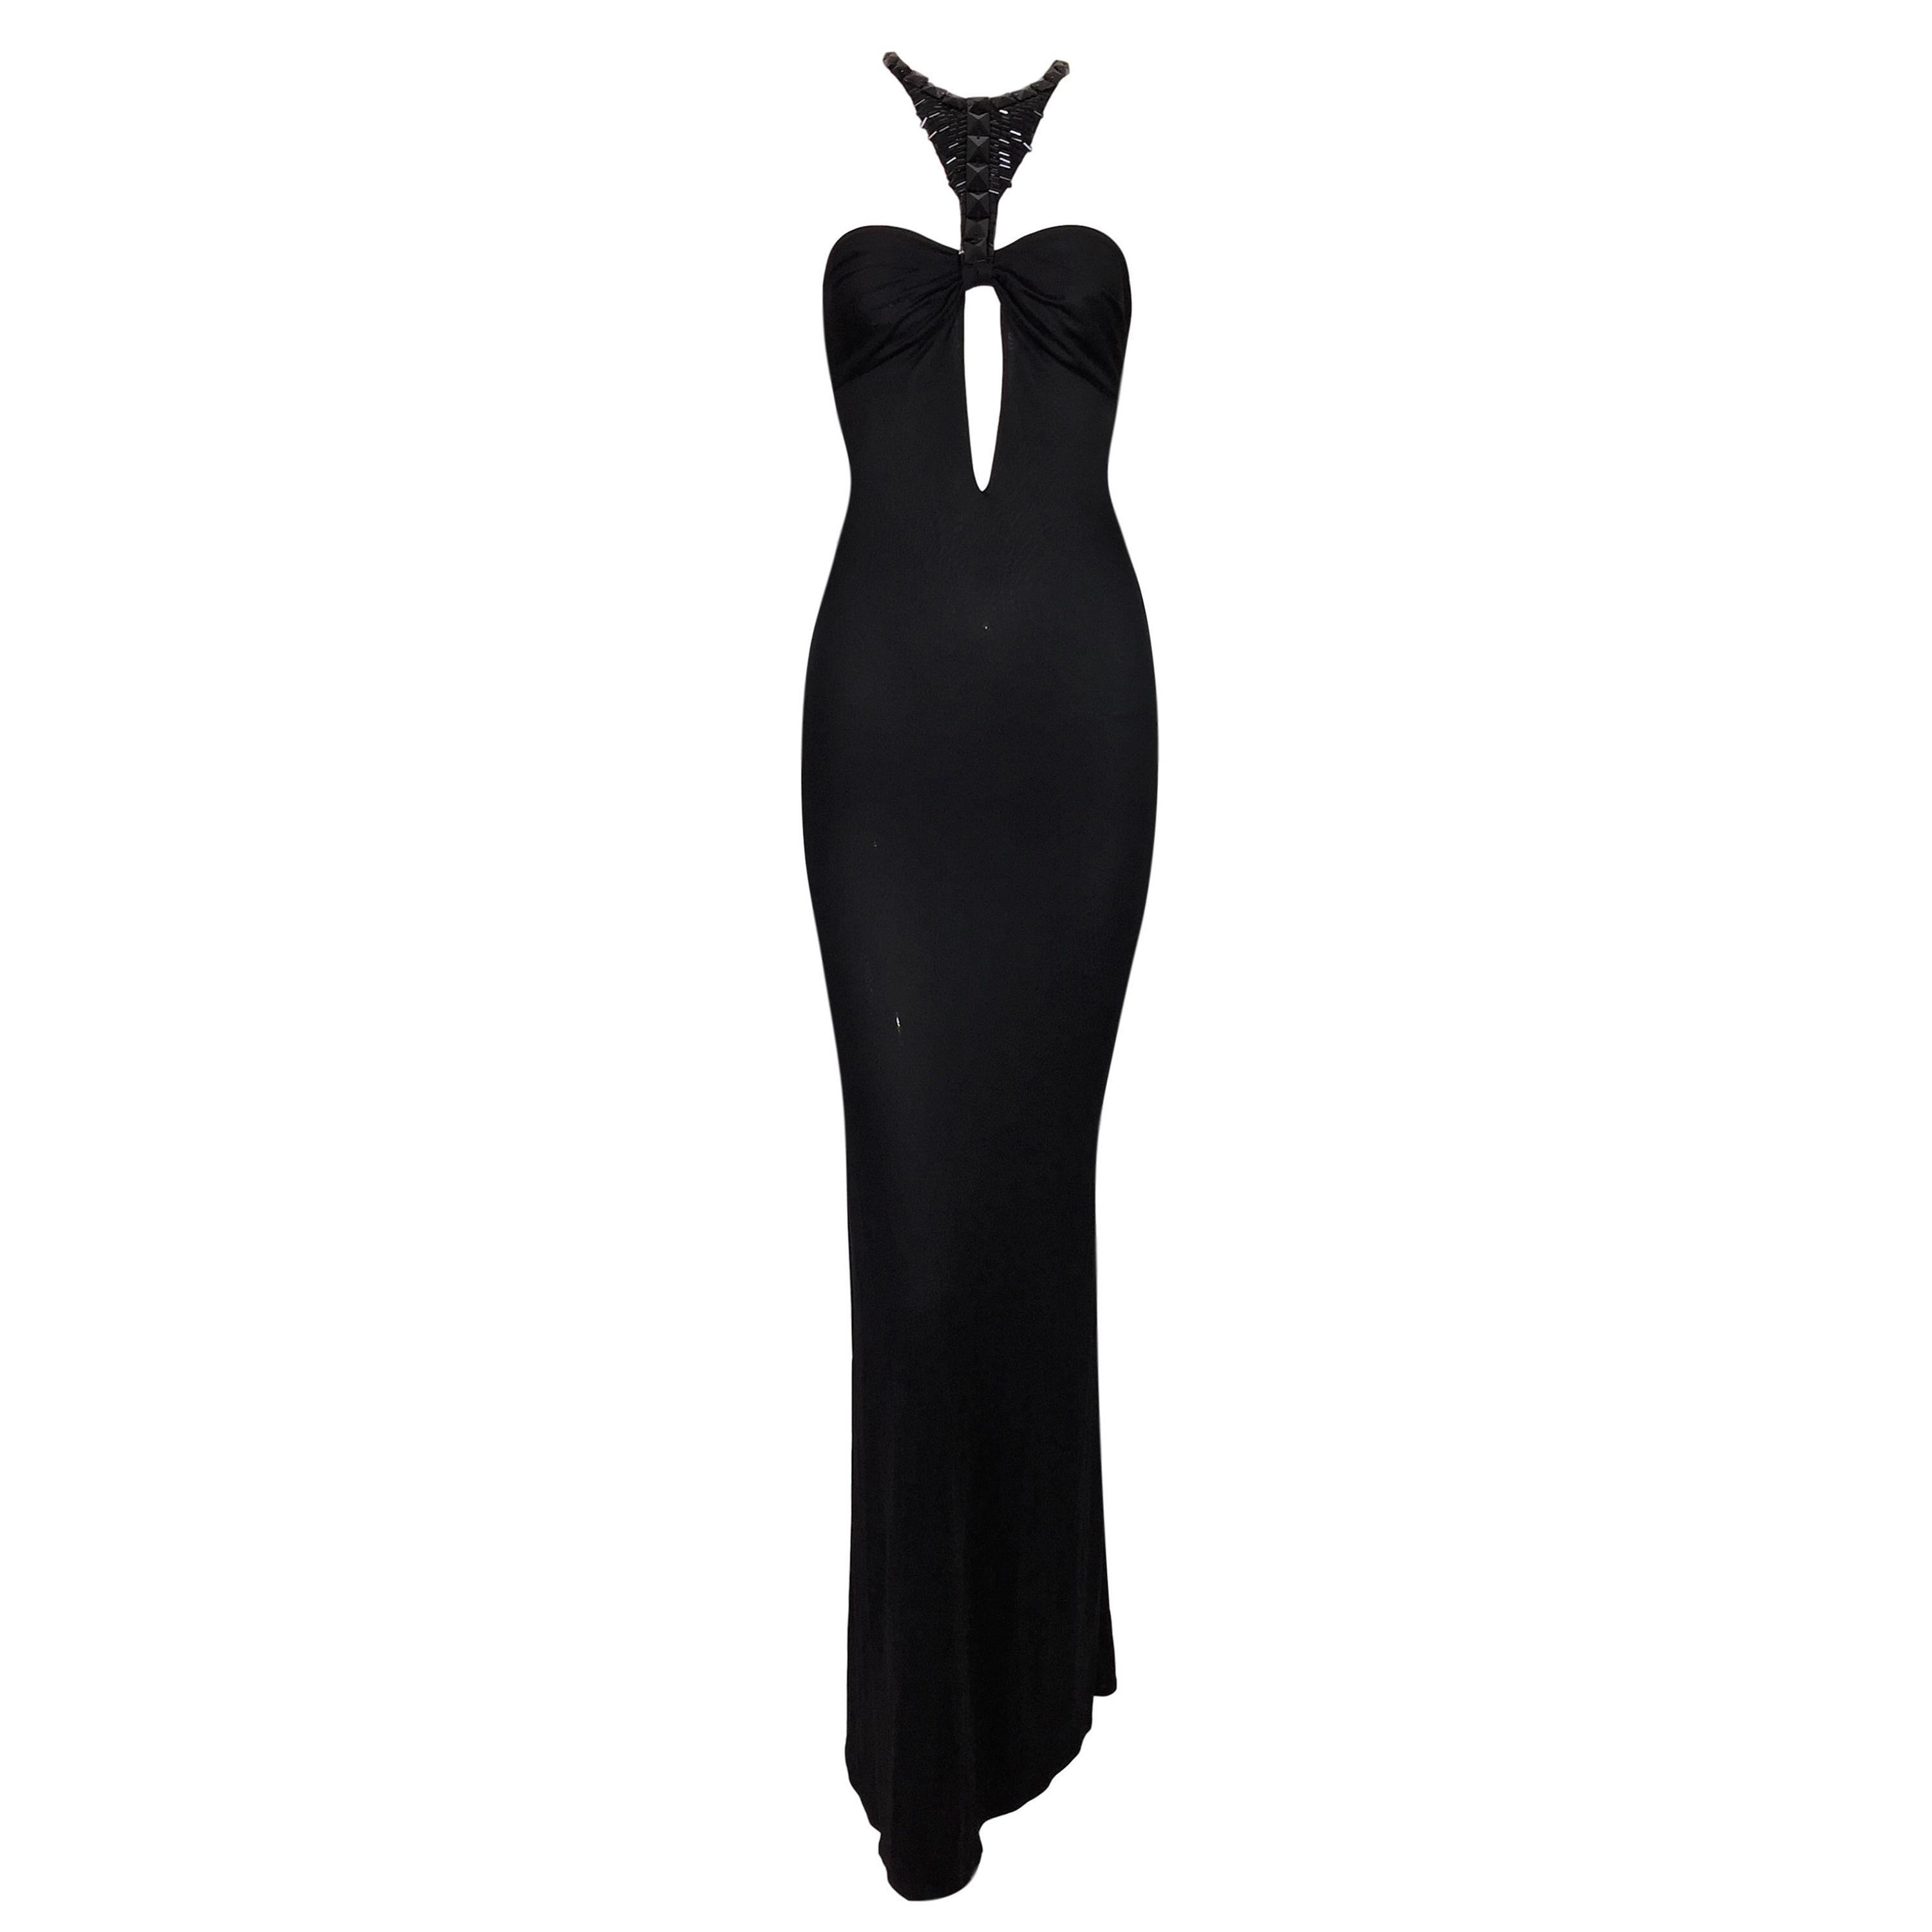 F/W 2004 Gucci Tom Ford Black Slinky Plunging Cut-Out Beaded Gown Dress